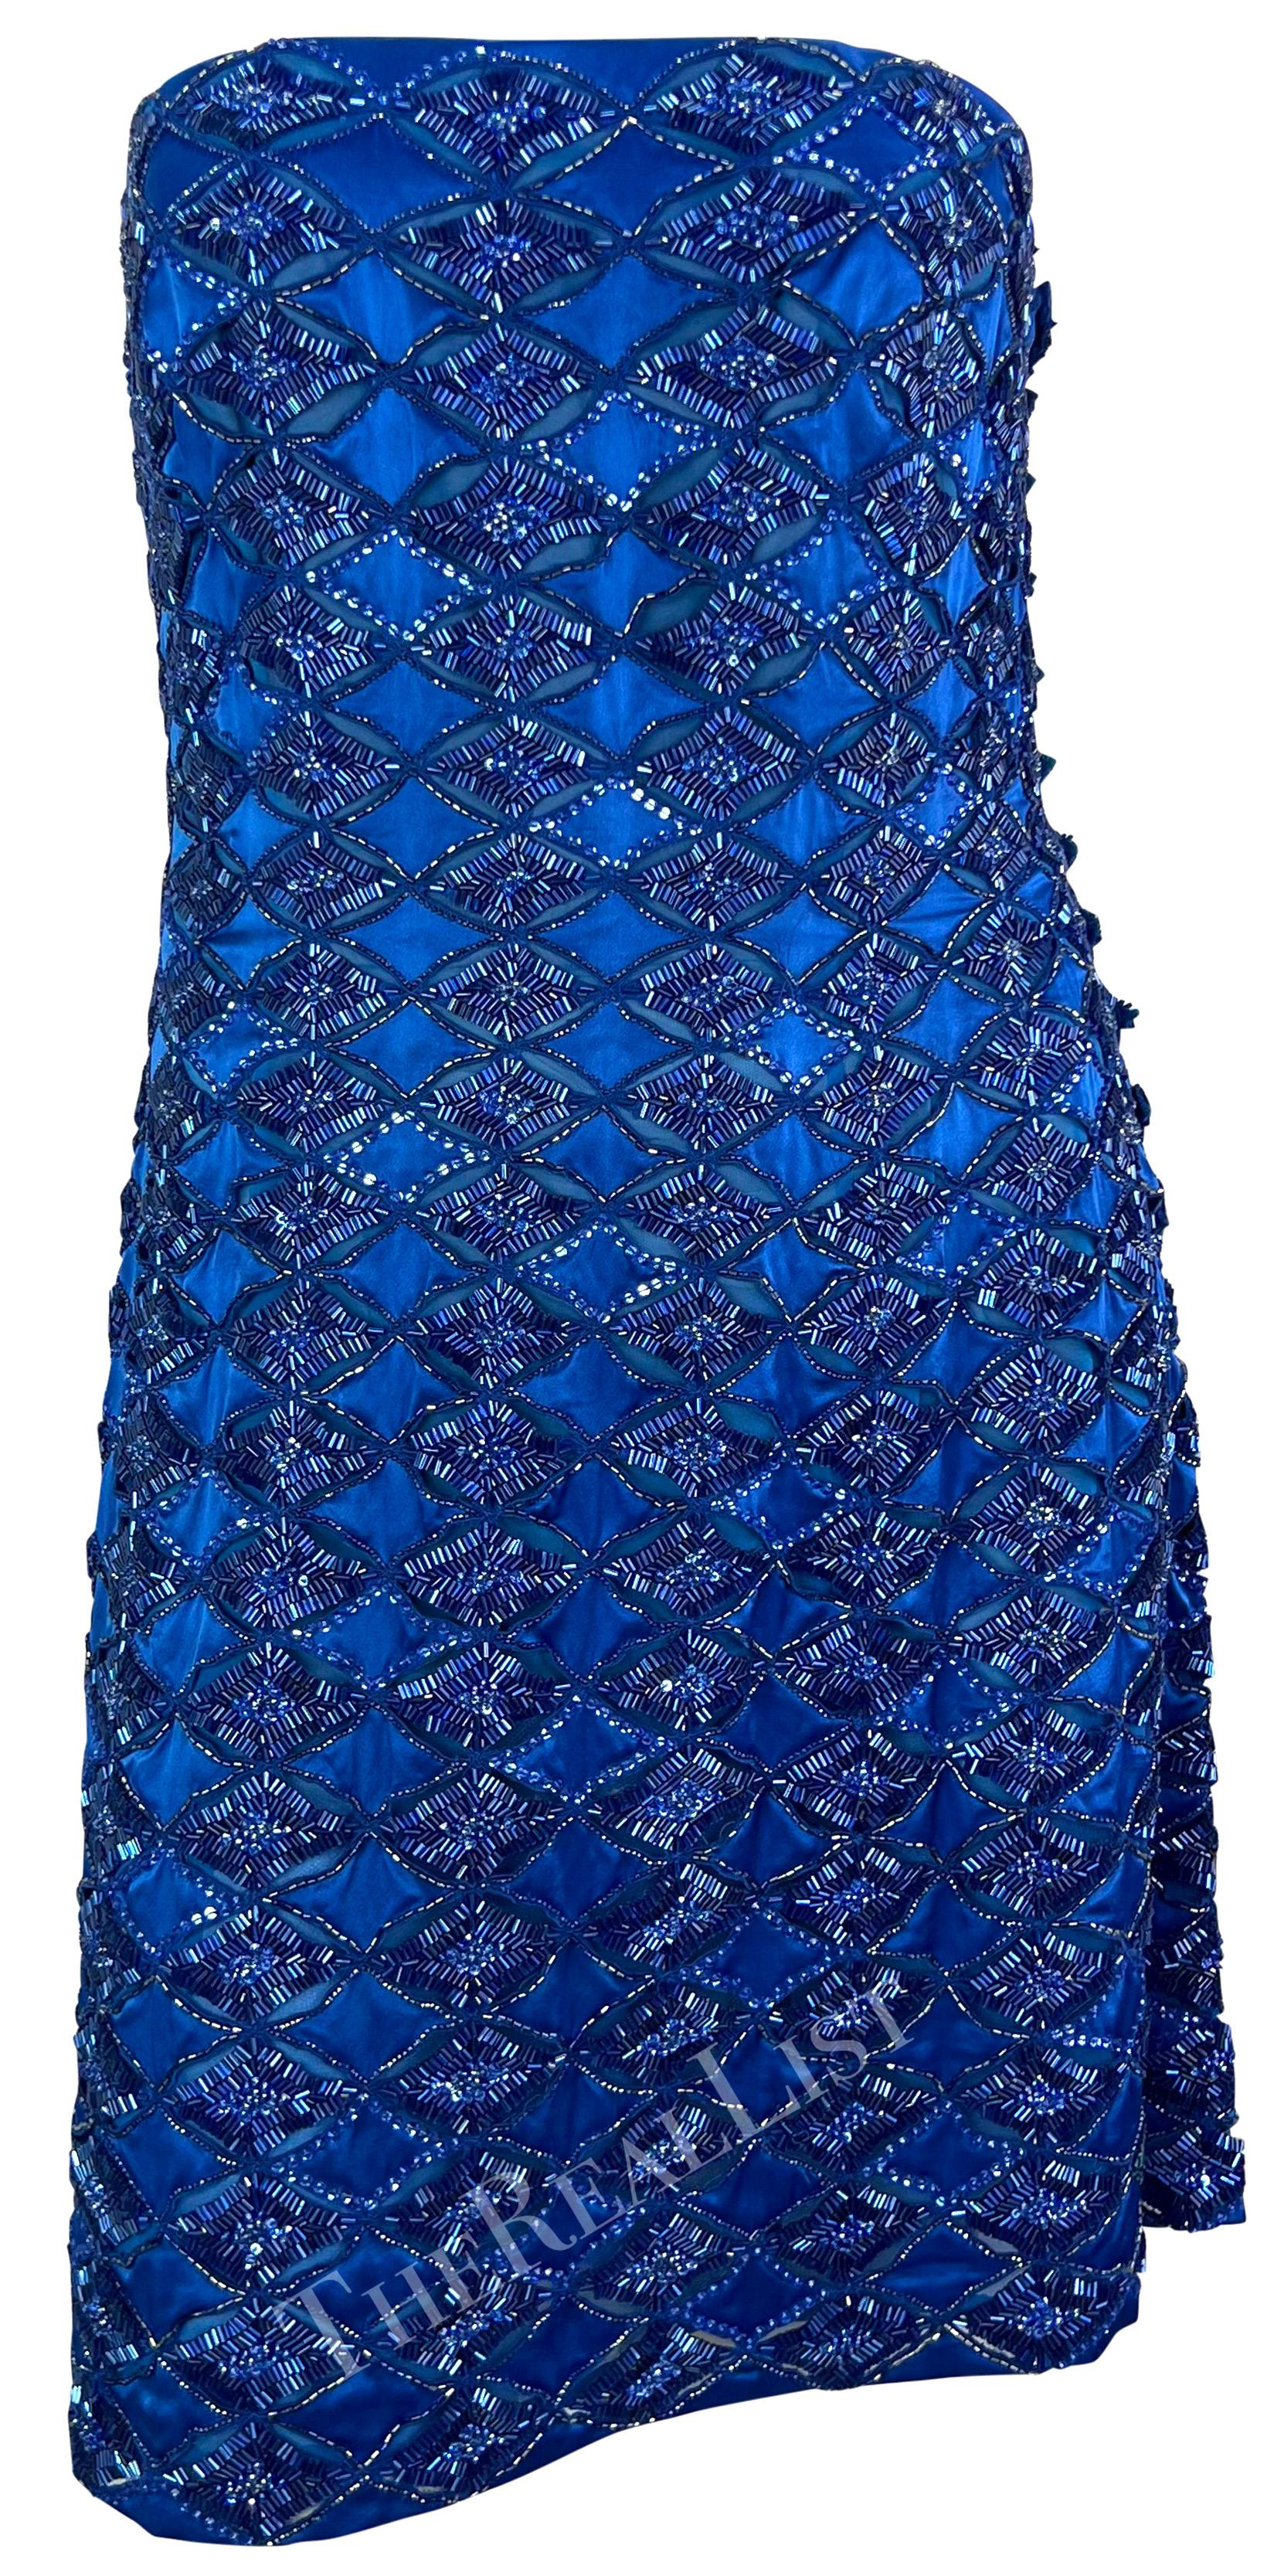 S/S 2001 Atelier Versace by Donatella Runway Blue Beaded Strapless Mini Dress For Sale 7